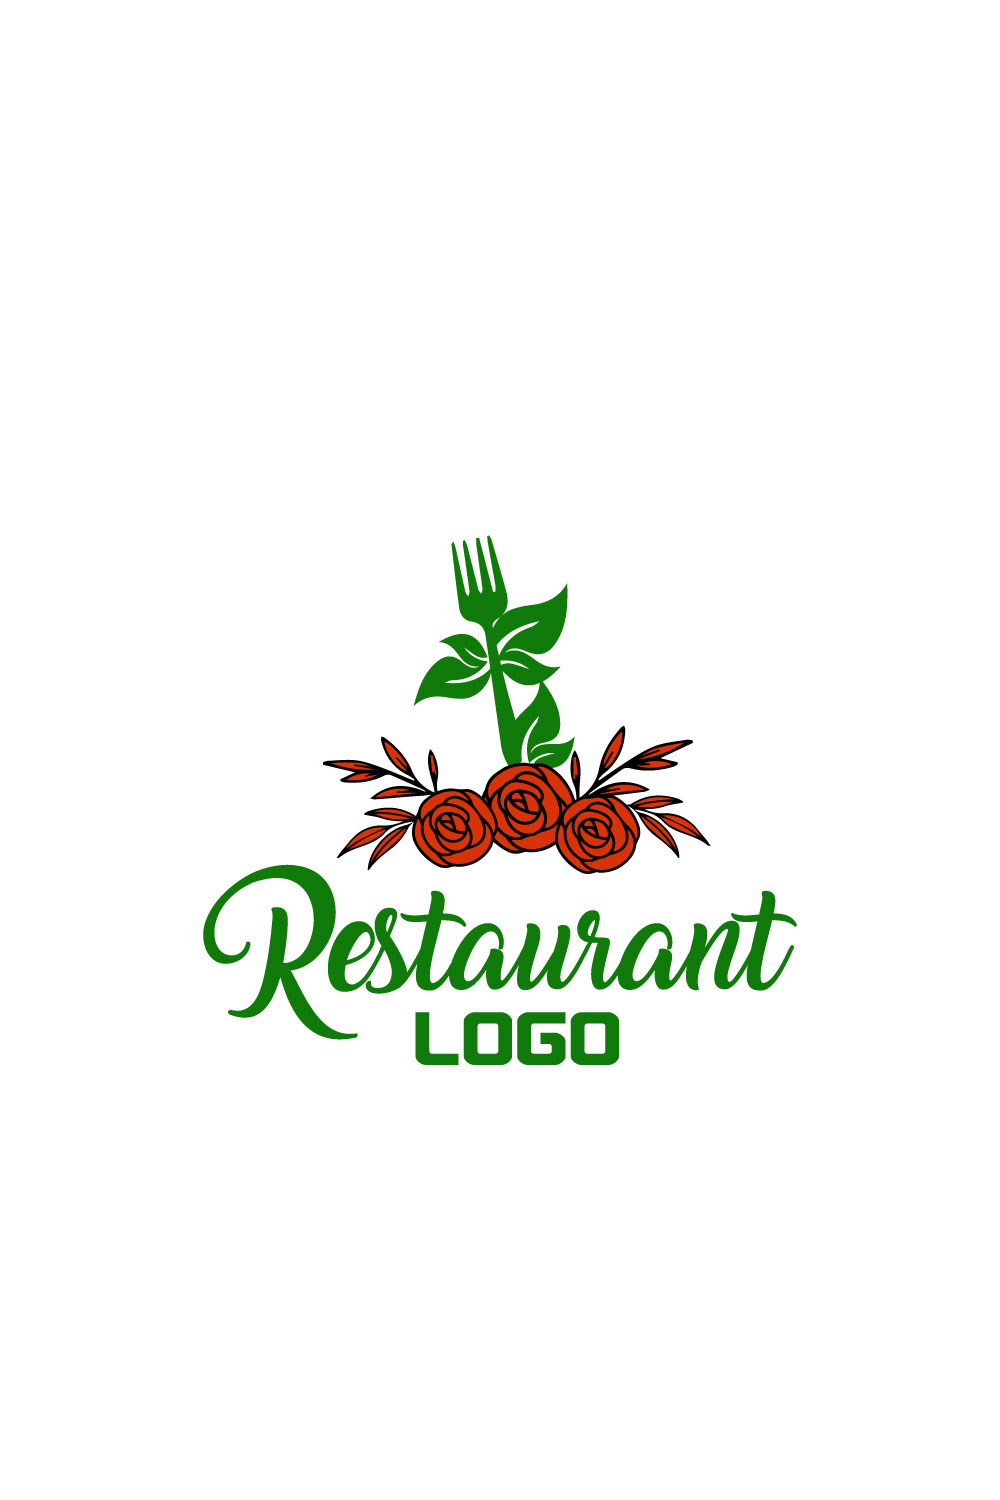 Free cooking logo ideas pinterest preview image.